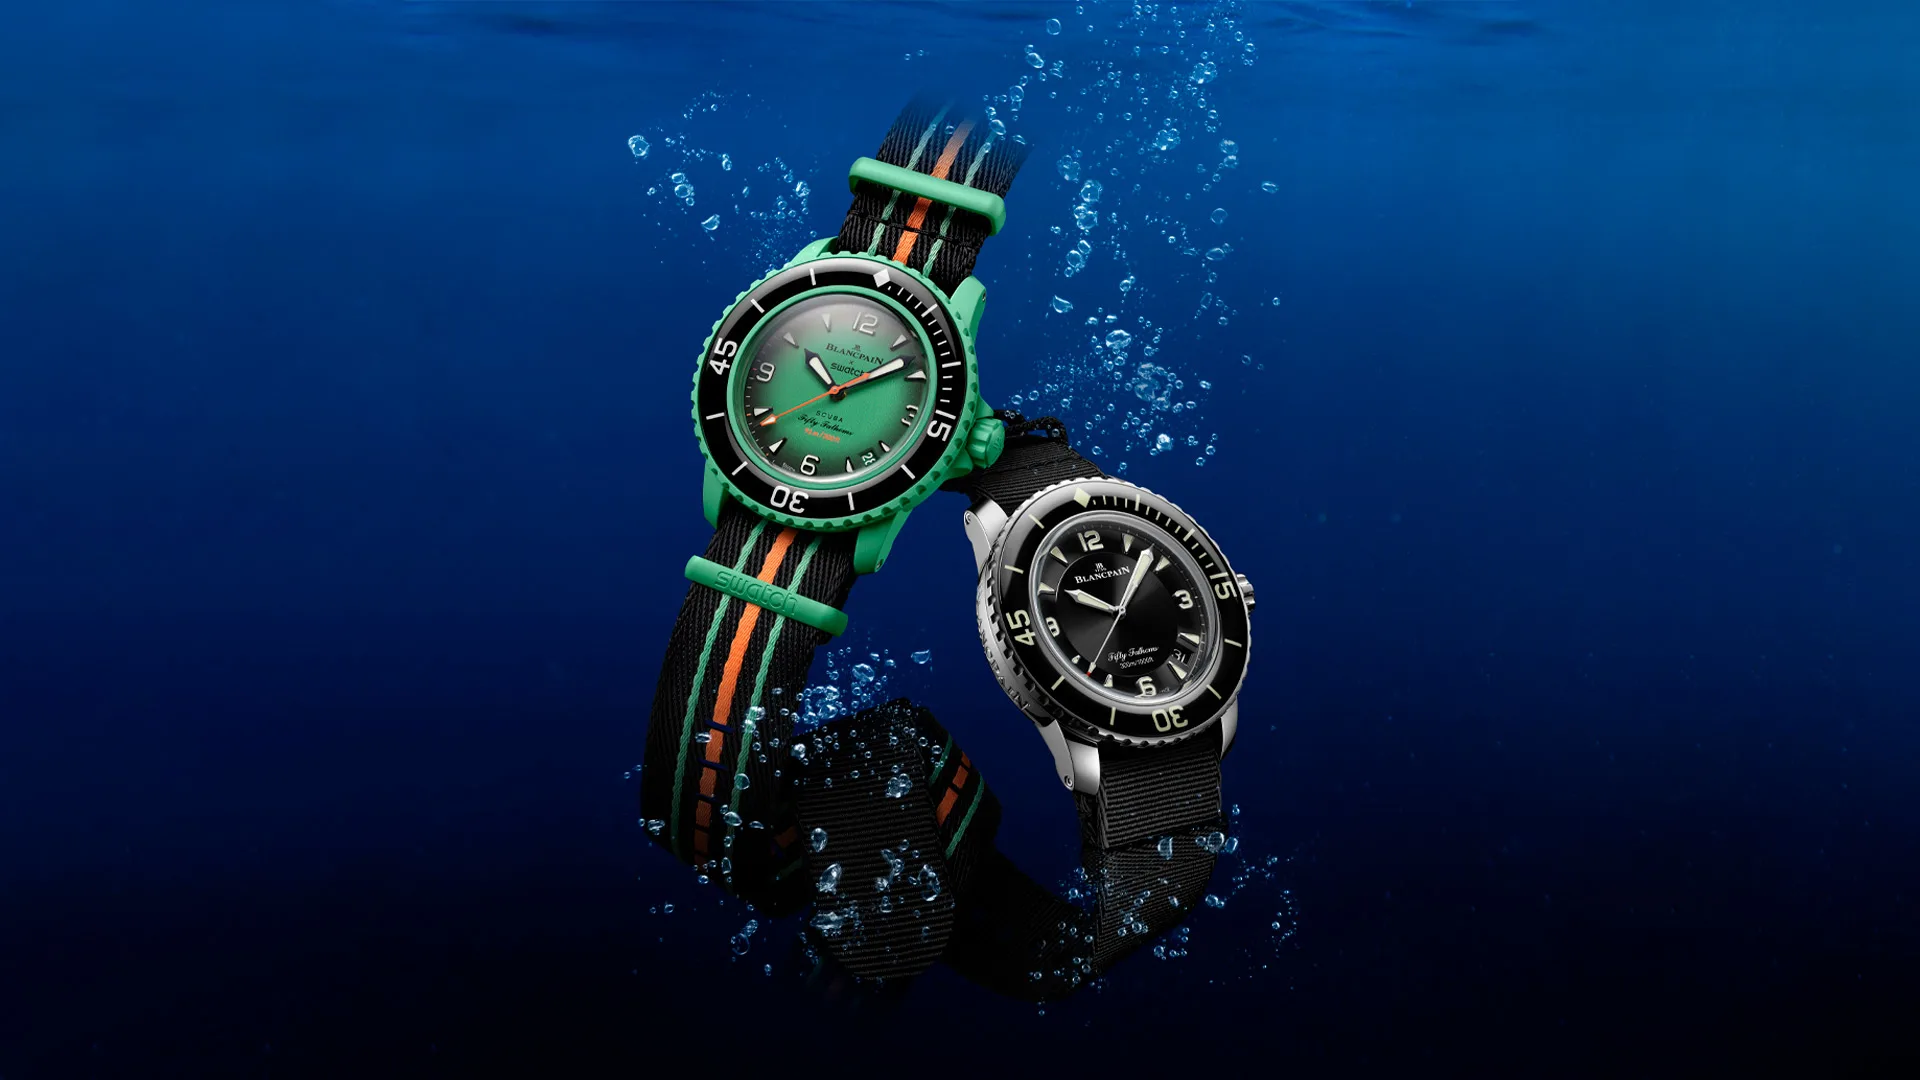 A tribute to a watchmaking icon and a celebration of the oceans